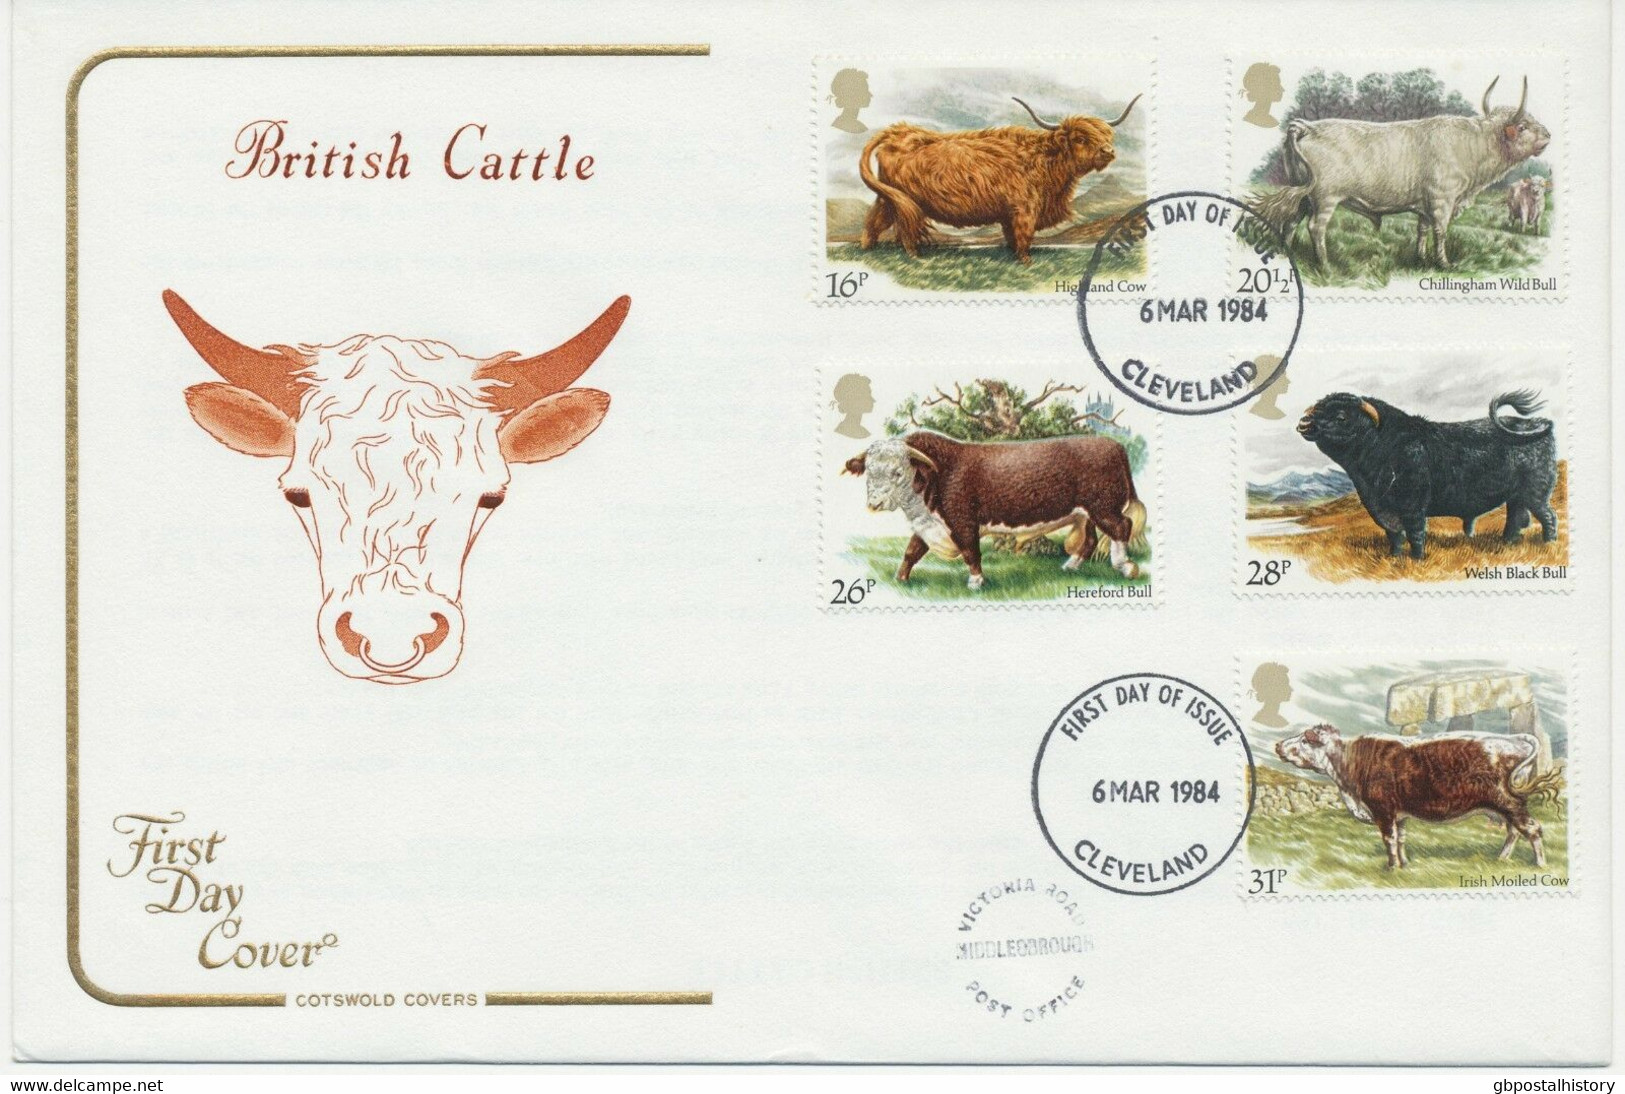 GB 1984 British Cattle Superb Ill. Cotswold FDC W FDI-CDS Of CLEVELAND POSTMARK-ERROR - 1981-1990 Decimal Issues